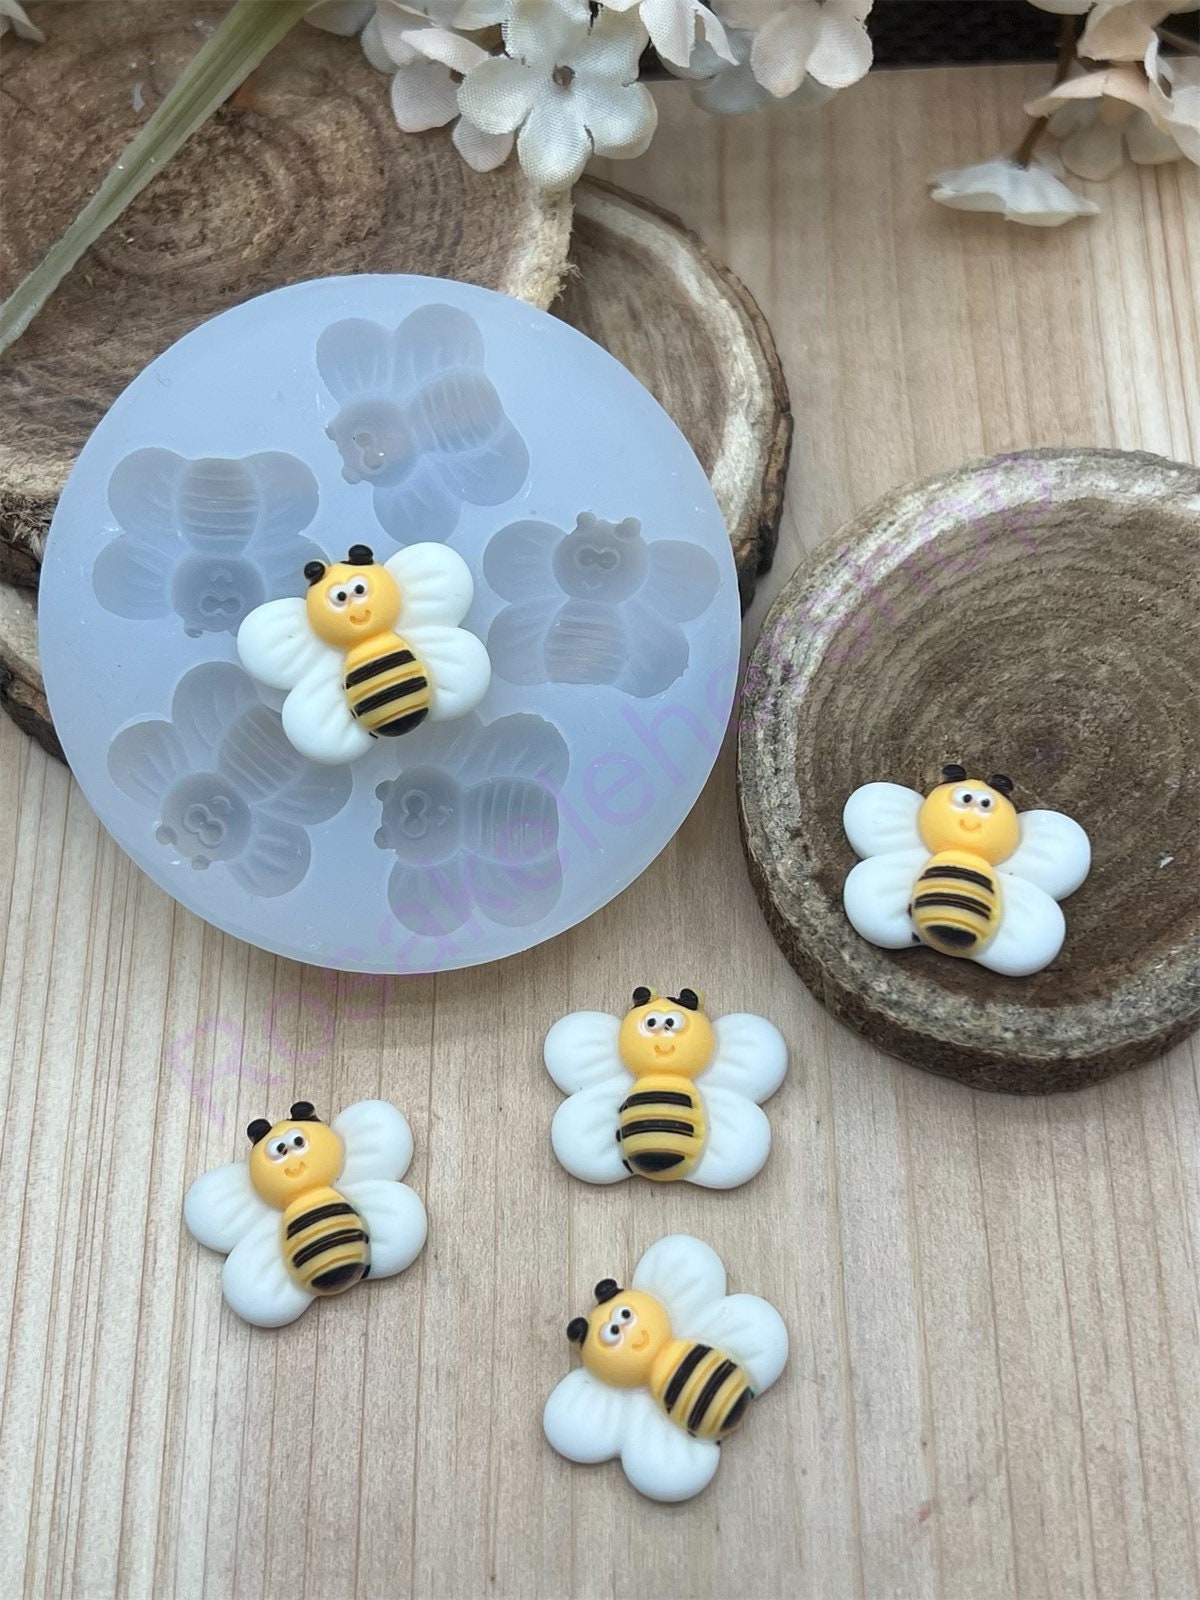 Honeycomb Bumble Bee Silicone Resin Mold Wall Hanging Plaster Clay Resin  Art KeyChain Molds - Silicone Molds Wholesale & Retail - Fondant, Soap,  Candy, DIY Cake Molds